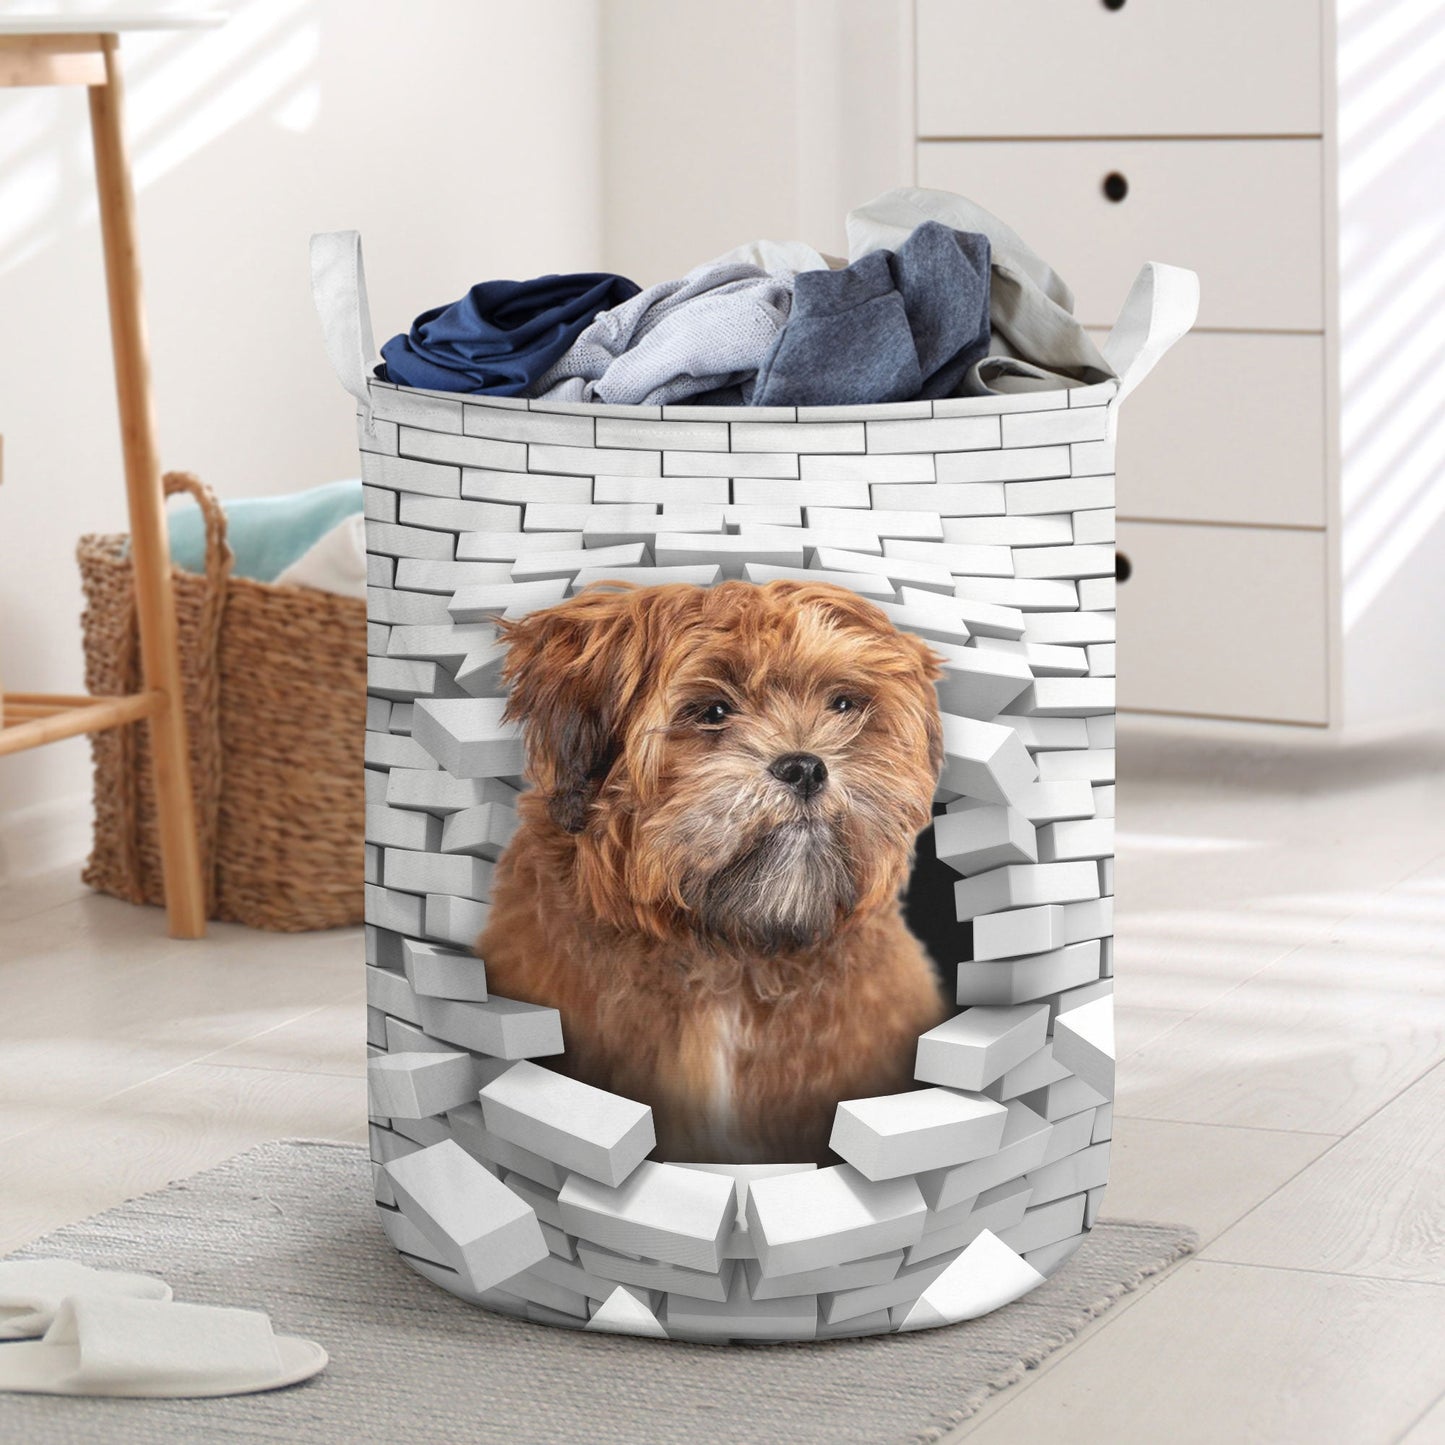 Zuchon - In The Hole Of Wall Pattern Laundry Basket